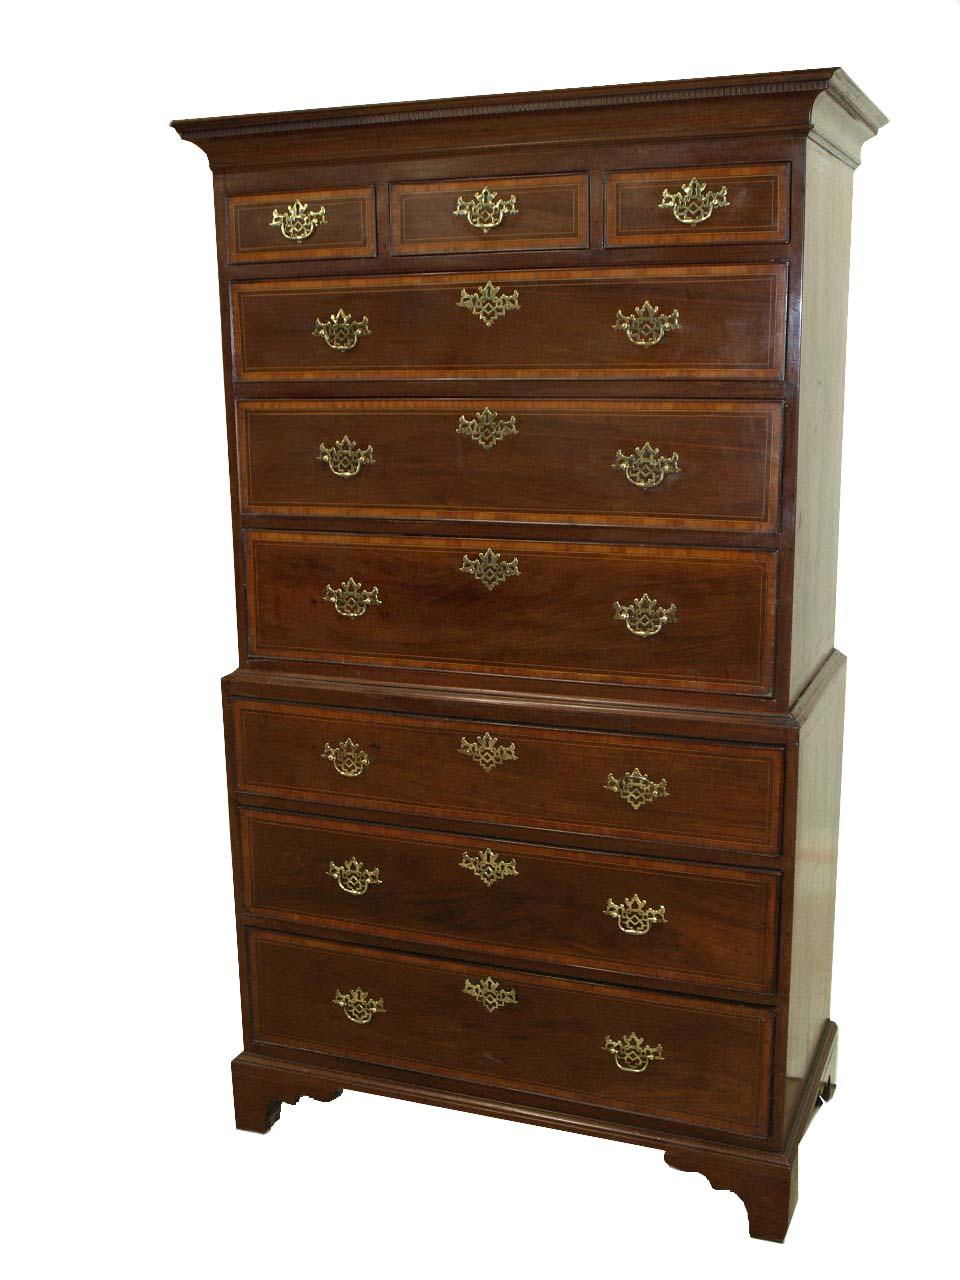 Inlaid George III chest on chest, the upper section with cove cornice above delicately crafted dentil molding. The three over three drawers are inlaid with a band of satinwood inside the cock bead, bordered by a combined string of ebony and boxwood